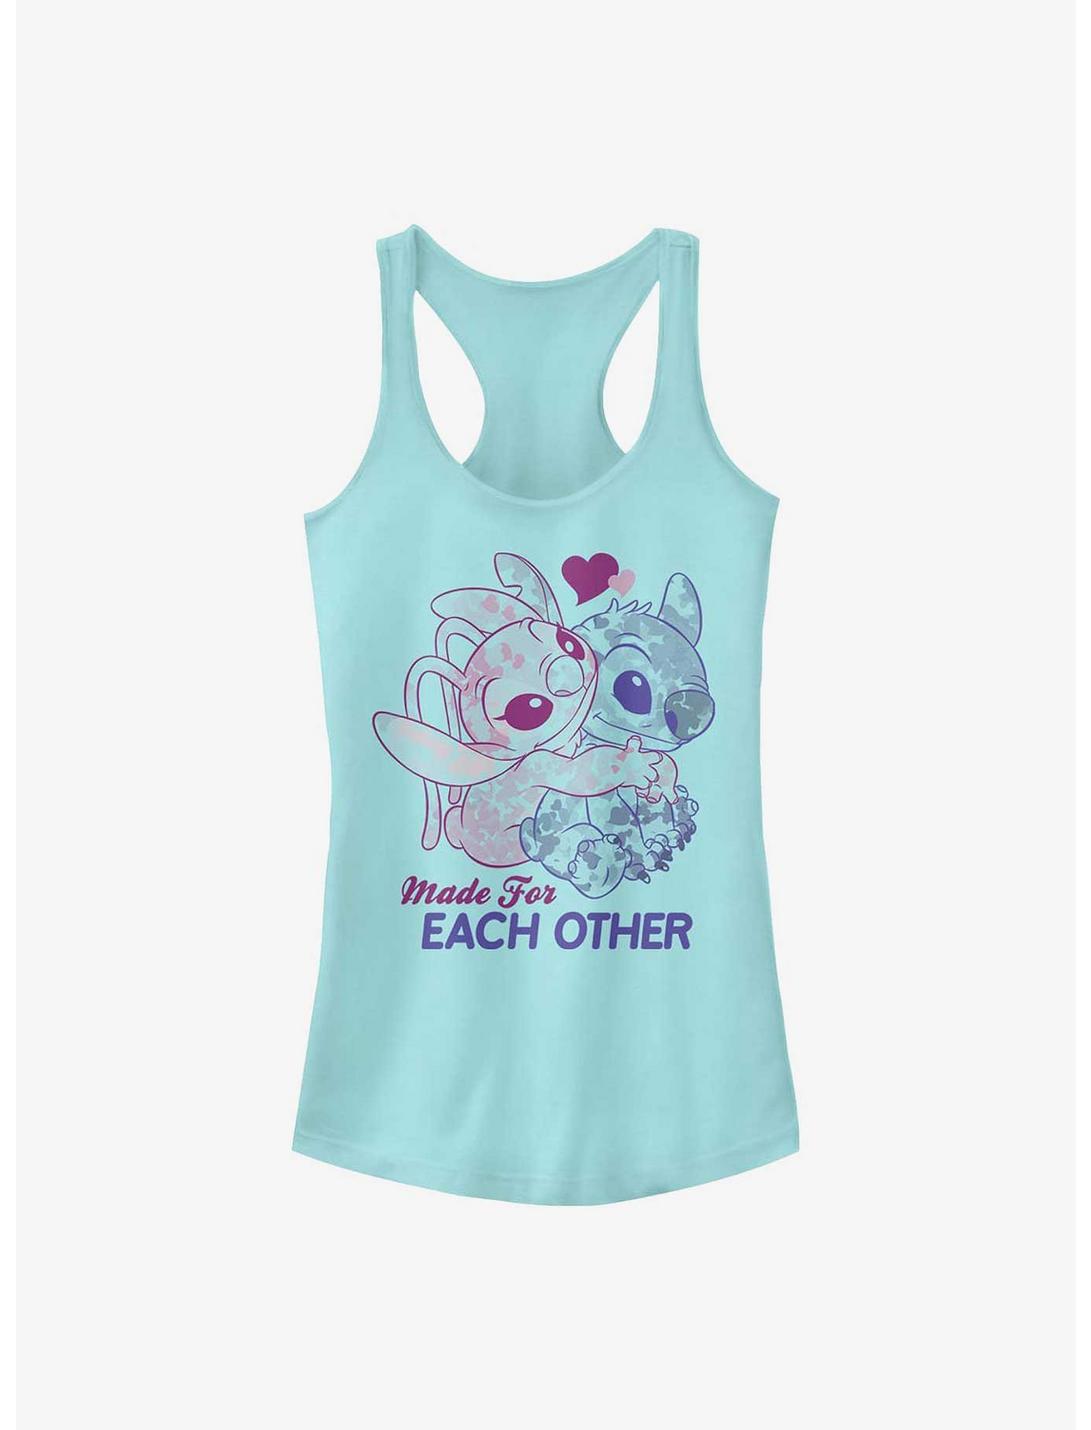 Disney Lilo & Stitch Made For Eachother Girls Tank, CANCUN, hi-res